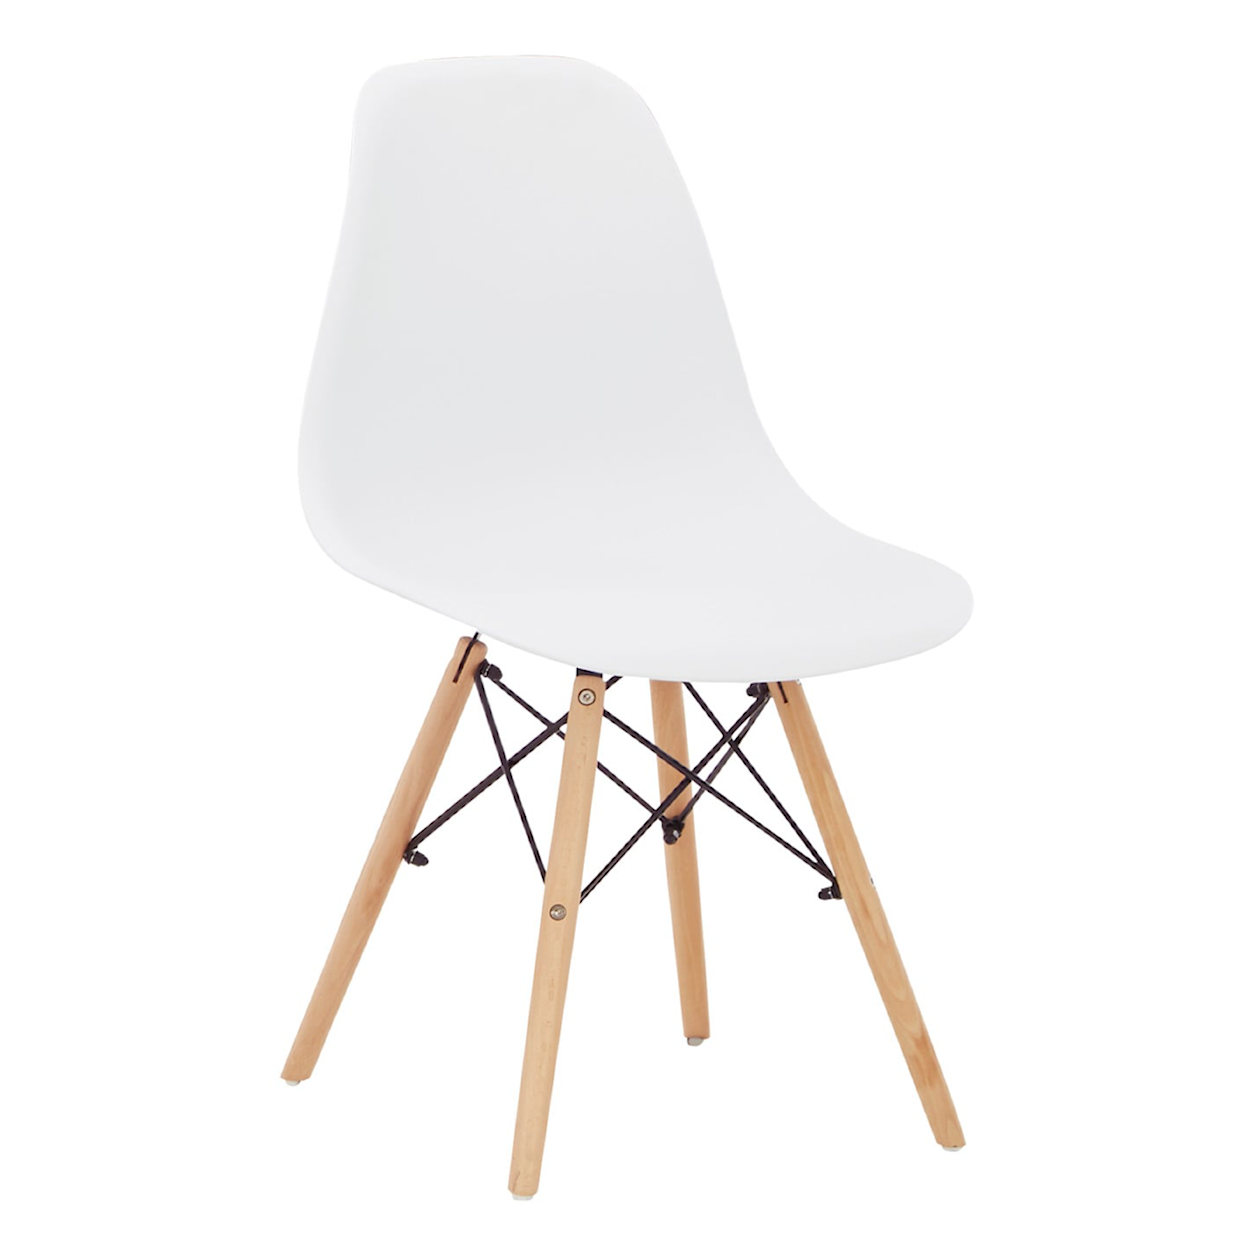 Signature Design by Ashley Furniture Jaspeni Dining Chair